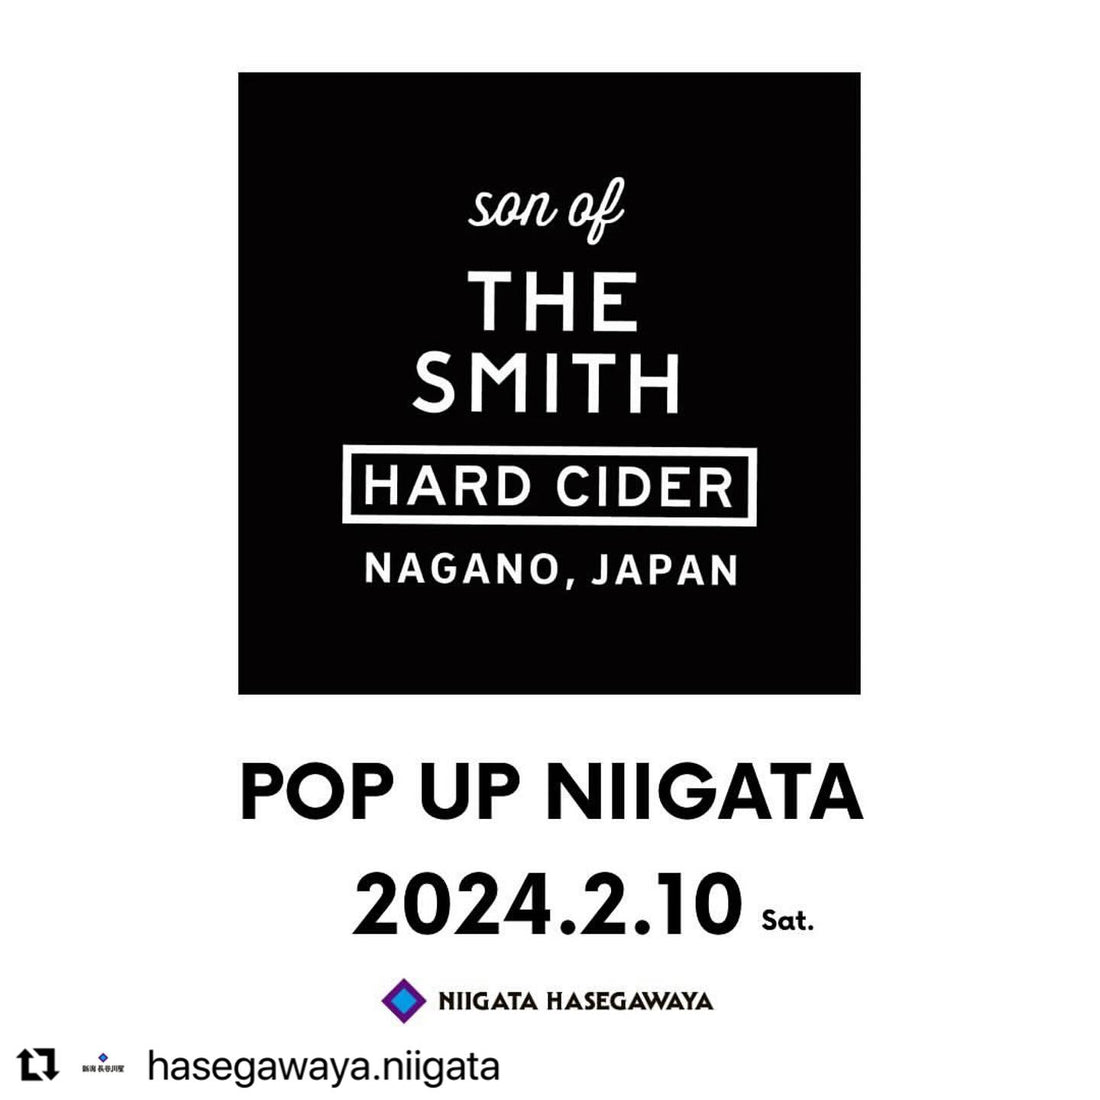 【2024.2.10】Son of the Smith POP UP 開催！